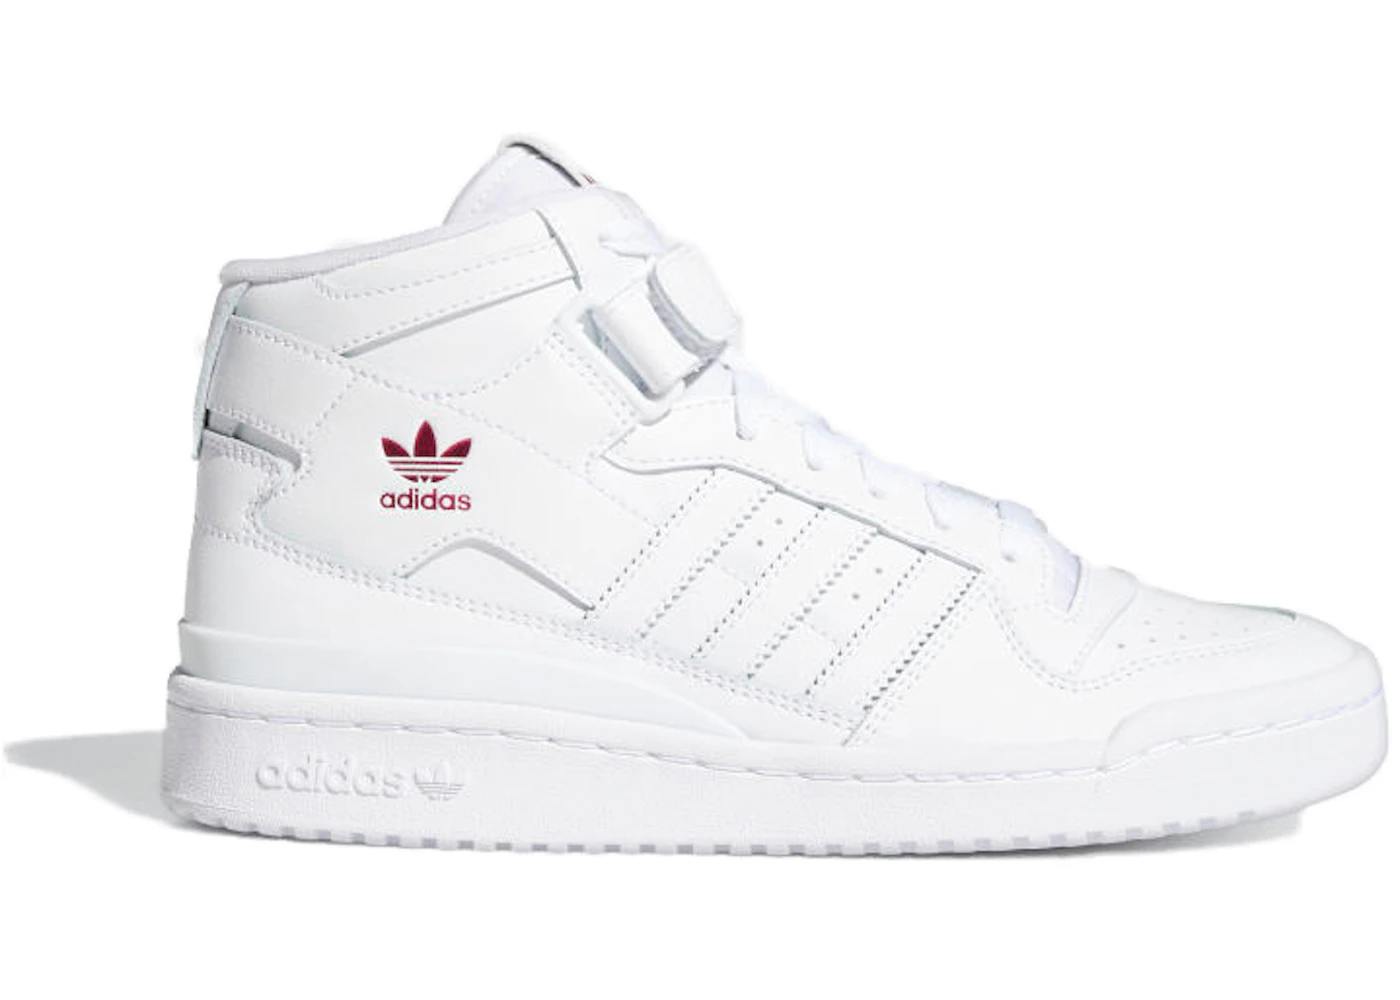 Adidas Originals Forum Luxe Mid Sneakers in White with Color Details